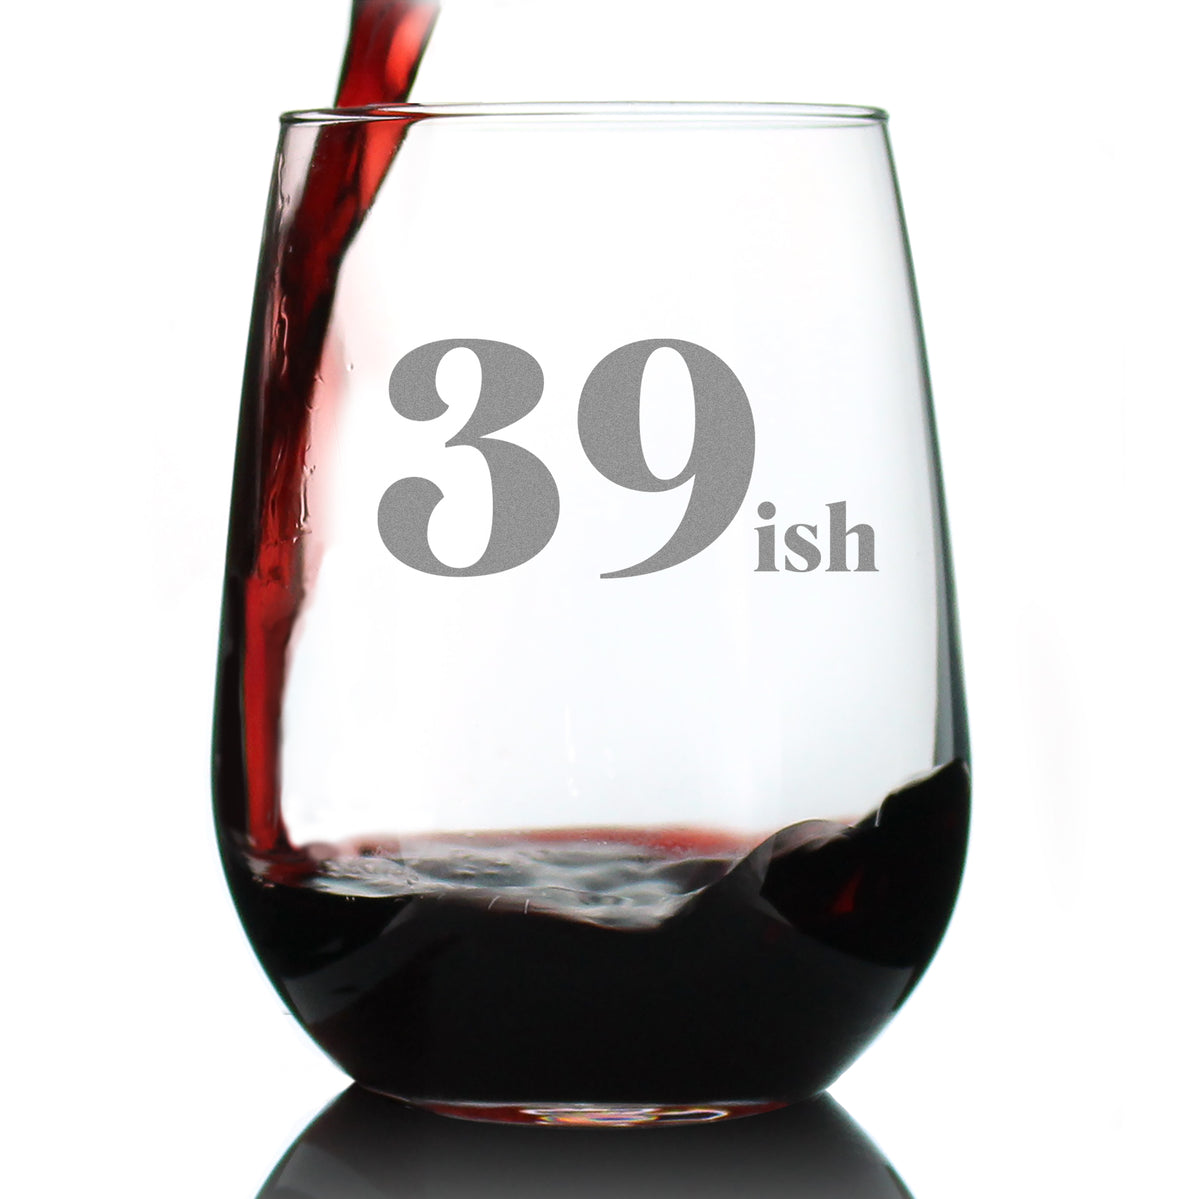 39ish - Funny 40th Birthday Wine Glass for Women Turning 40 - Large 17 Oz - Bday Party Decorations